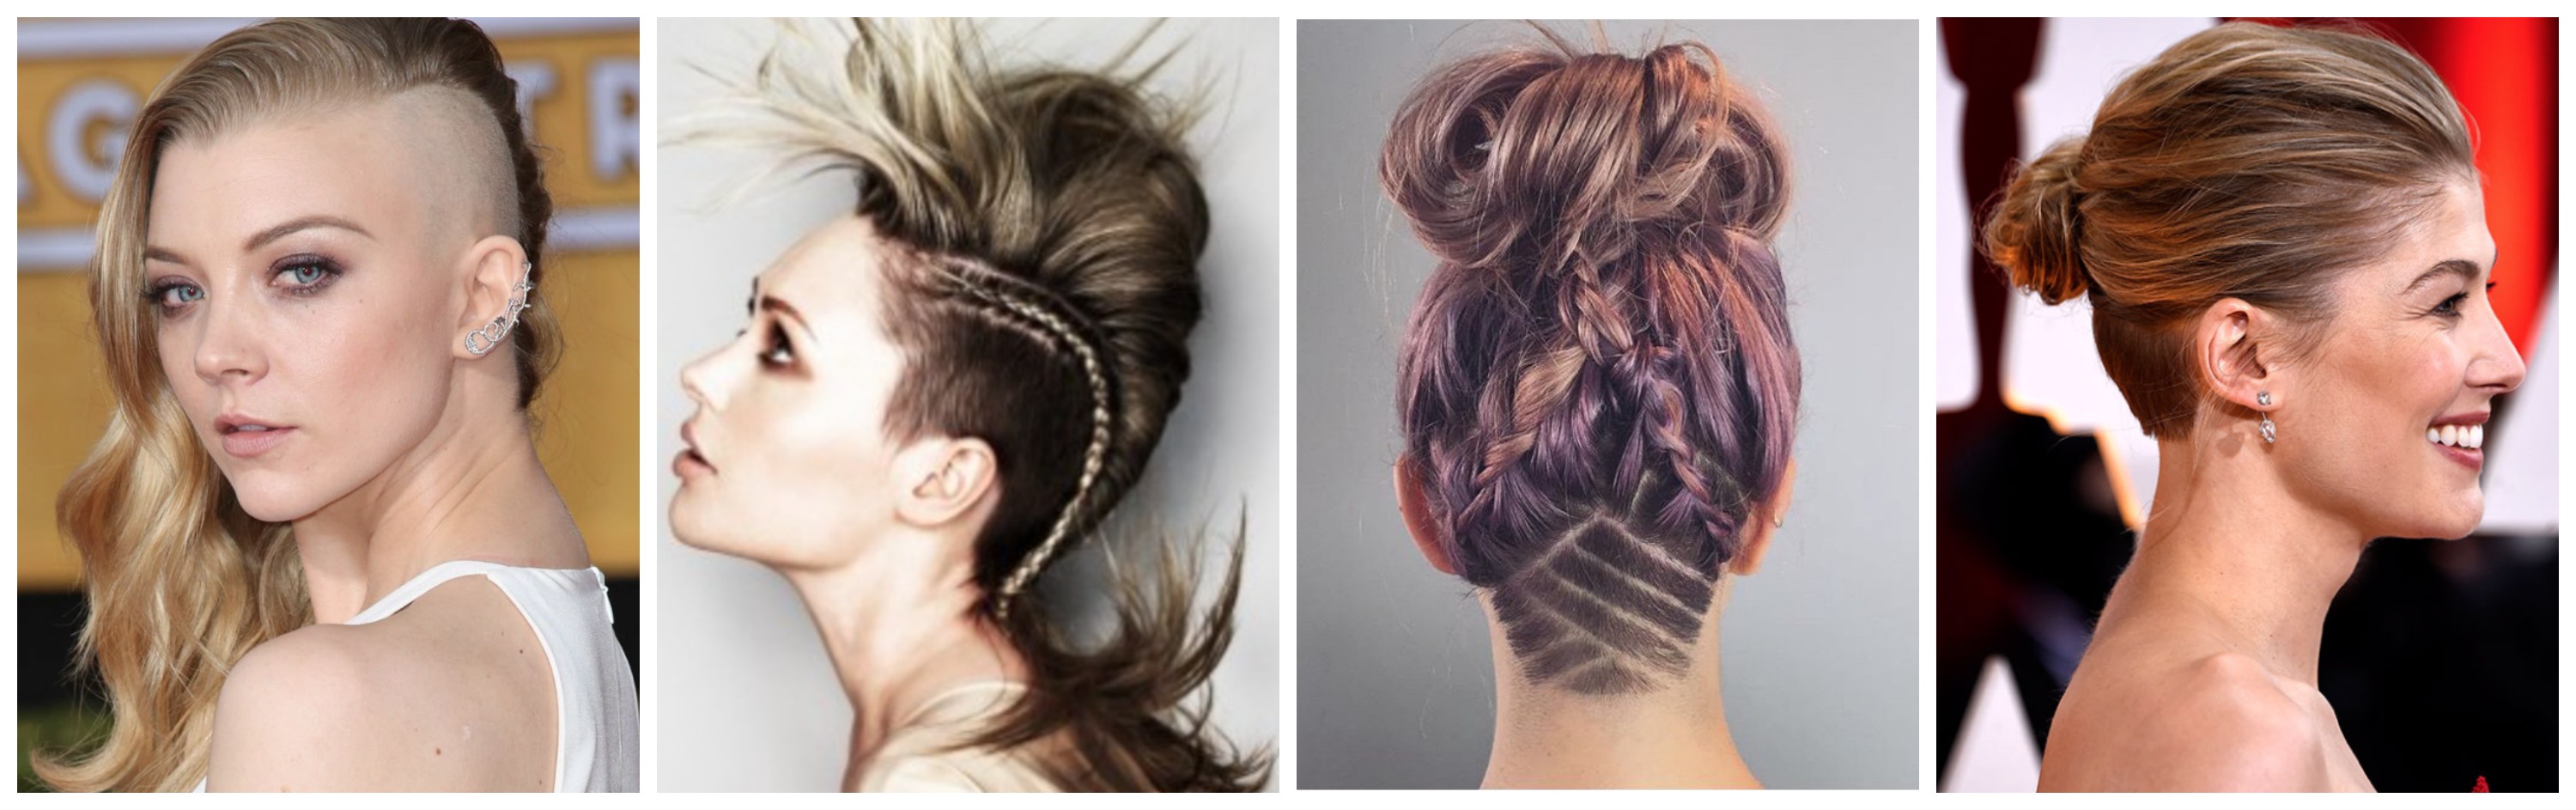 things you should know about undercuts